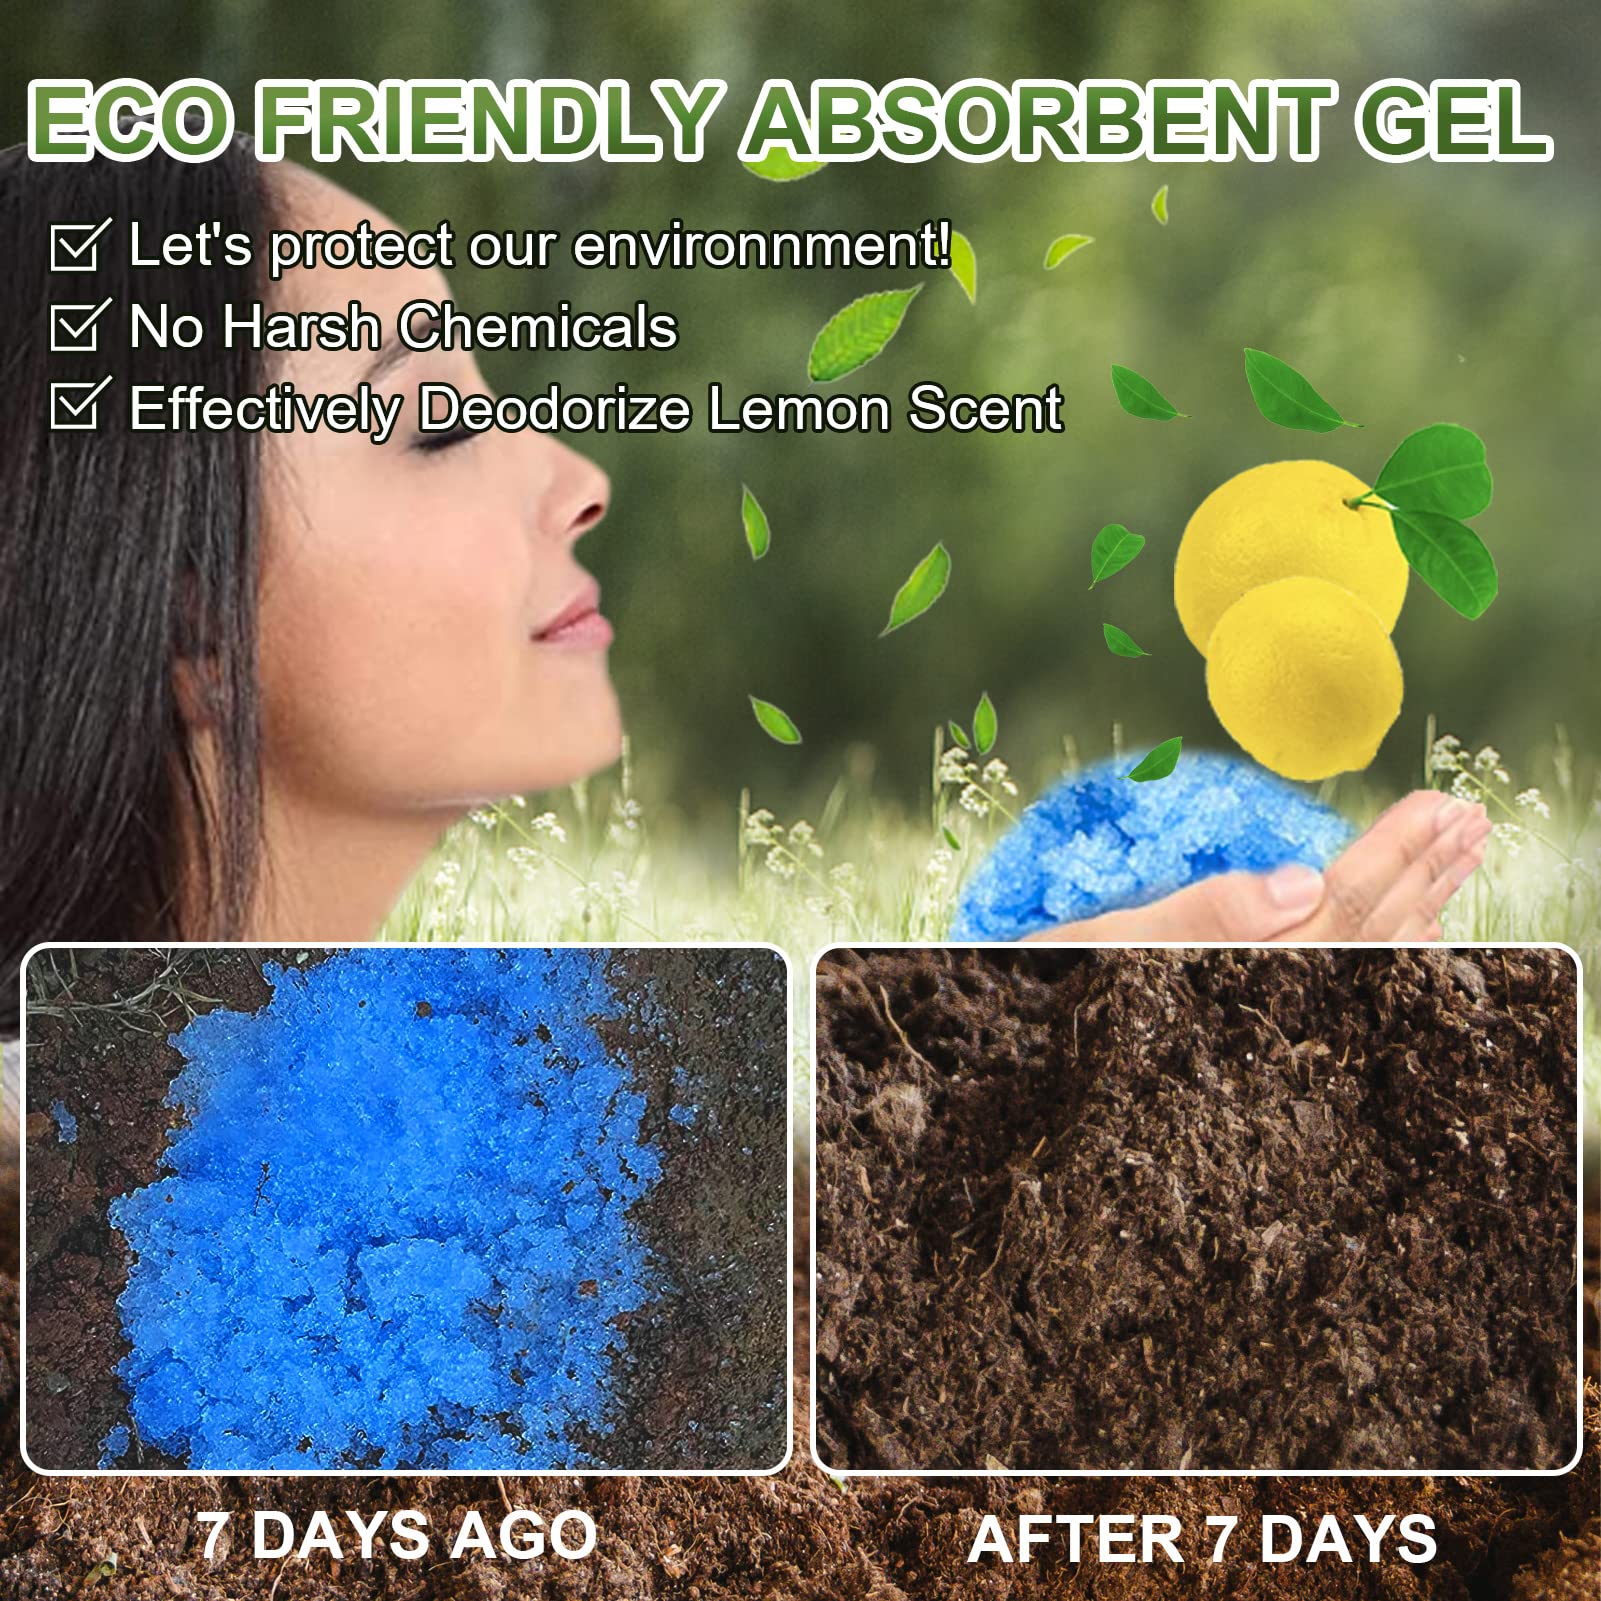 AOKE Portable Toilet Absorbent Gel Powder - 25 Pack Poo Deodorizing Treatment for Outdoor Camping and Hiking